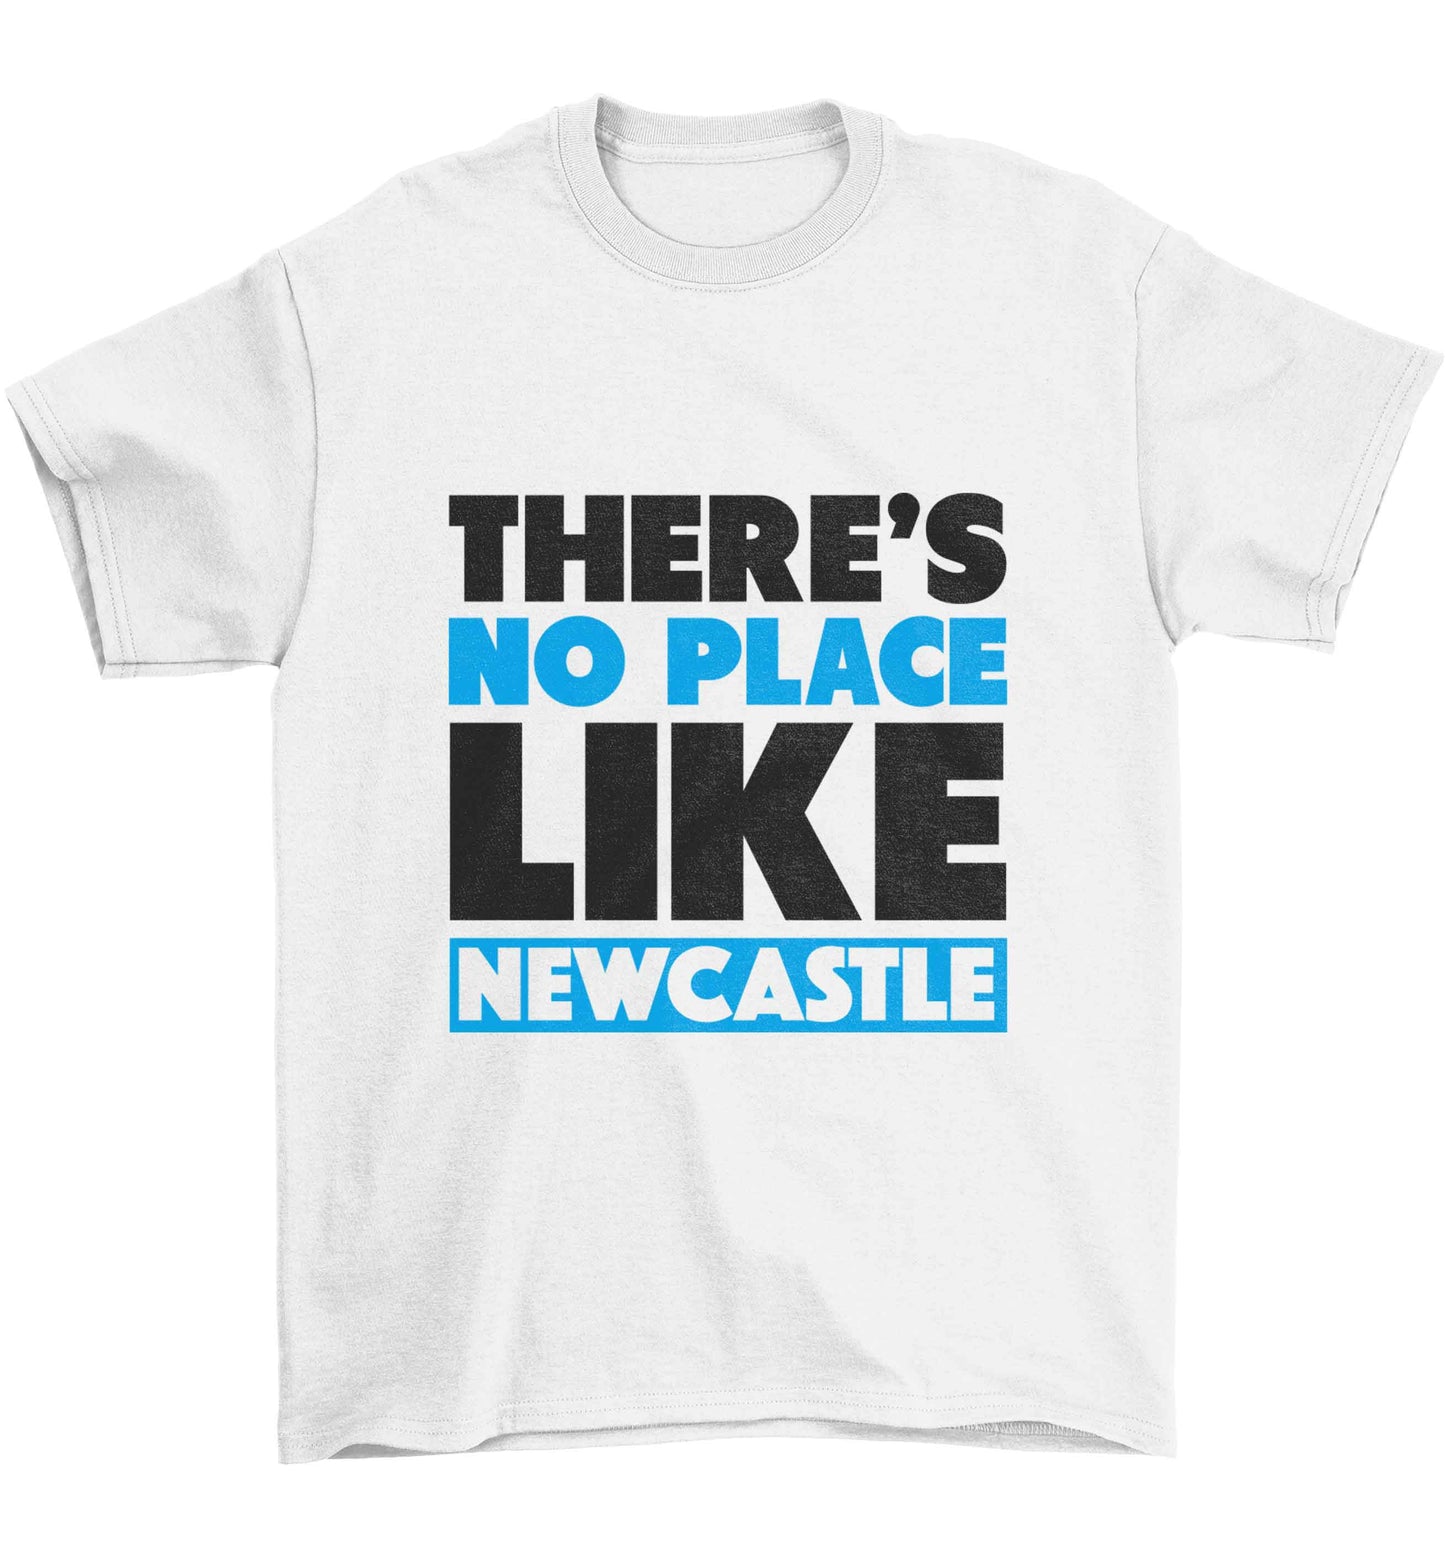 There's no place like Newcastle Children's white Tshirt 12-13 Years